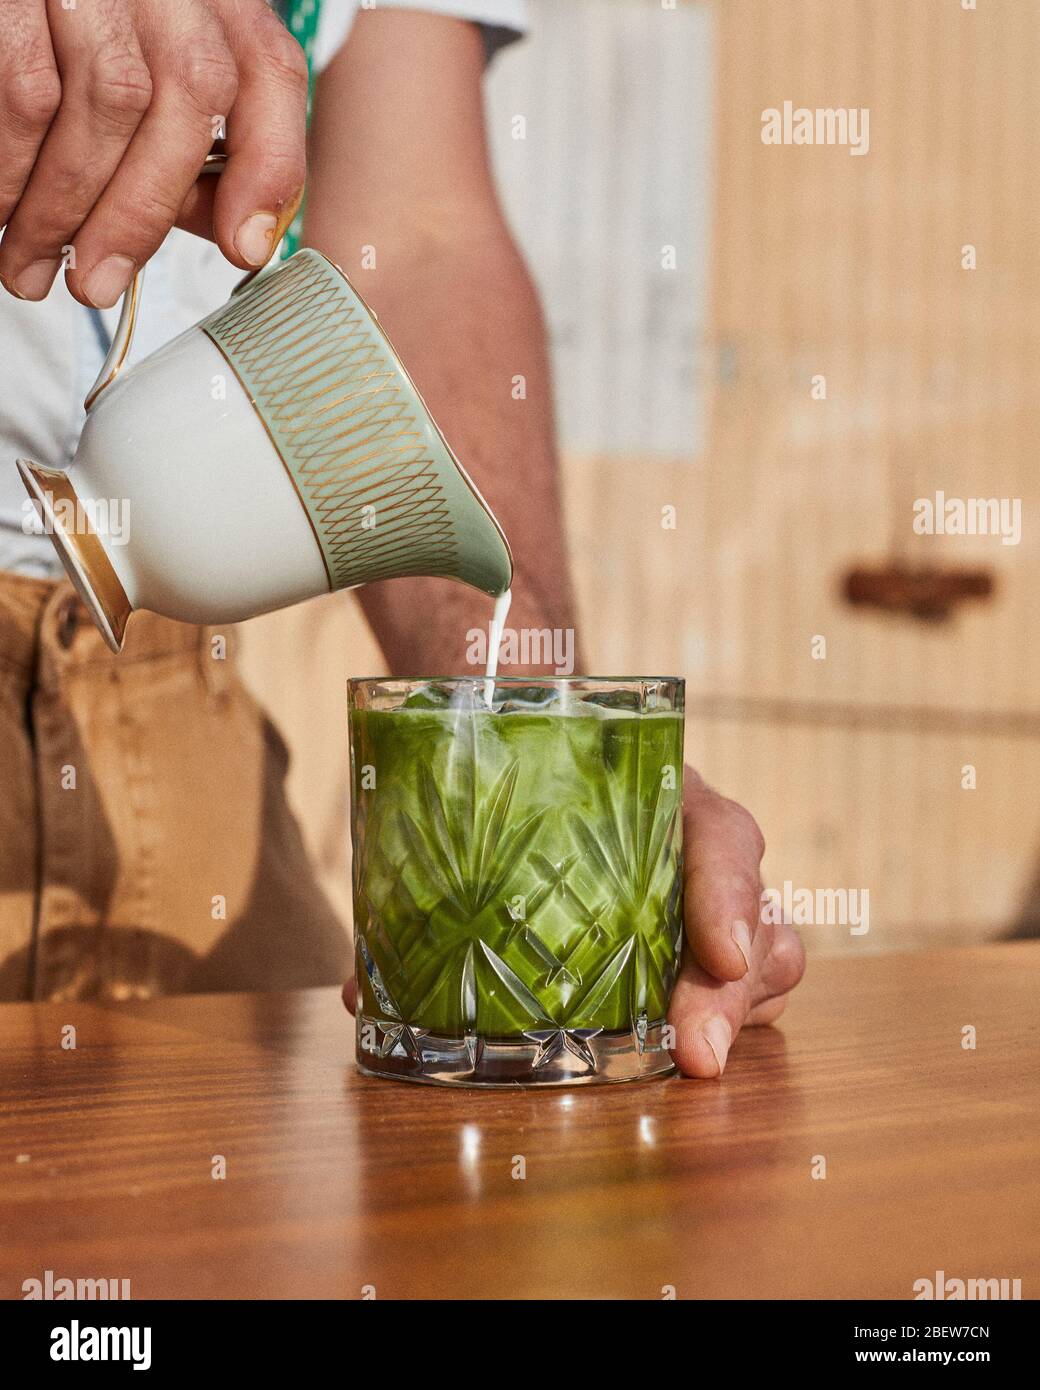 Pouring Coconut Milk into a Matcha Latte Stock Photo